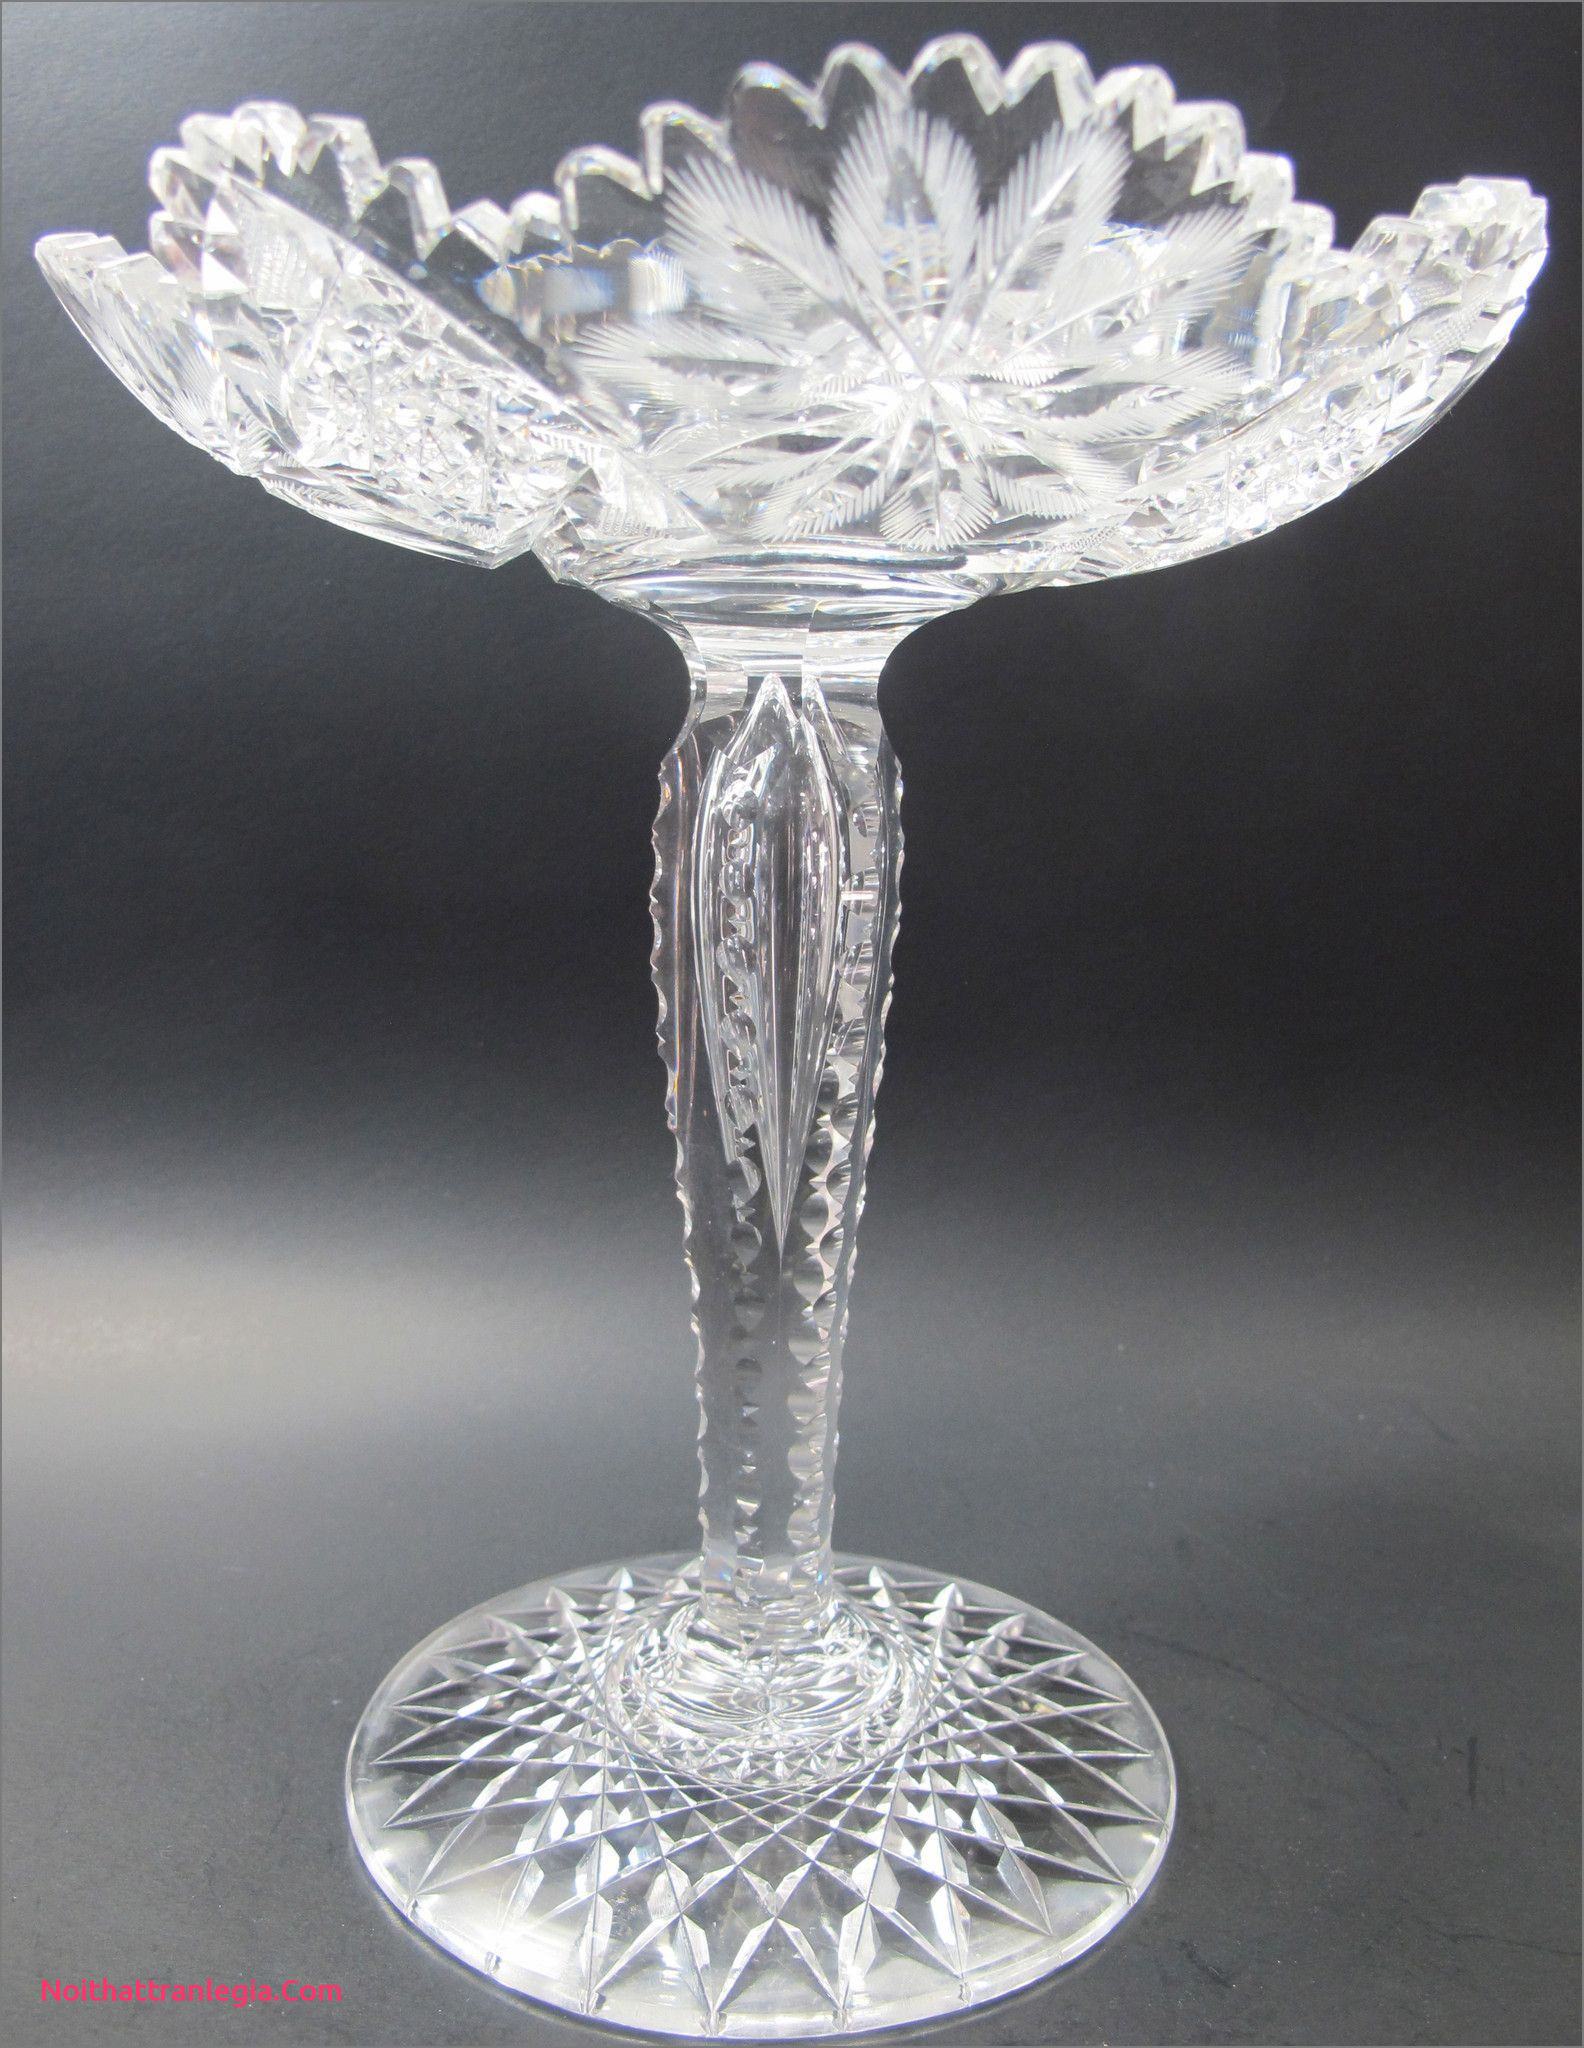 18 Awesome Bohemian Cut Glass Vase 2024 free download bohemian cut glass vase of 20 cut glass antique vase noithattranlegia vases design inside fering this abp antique cut glass pote from the american brilliant period 1886 1916 9 5